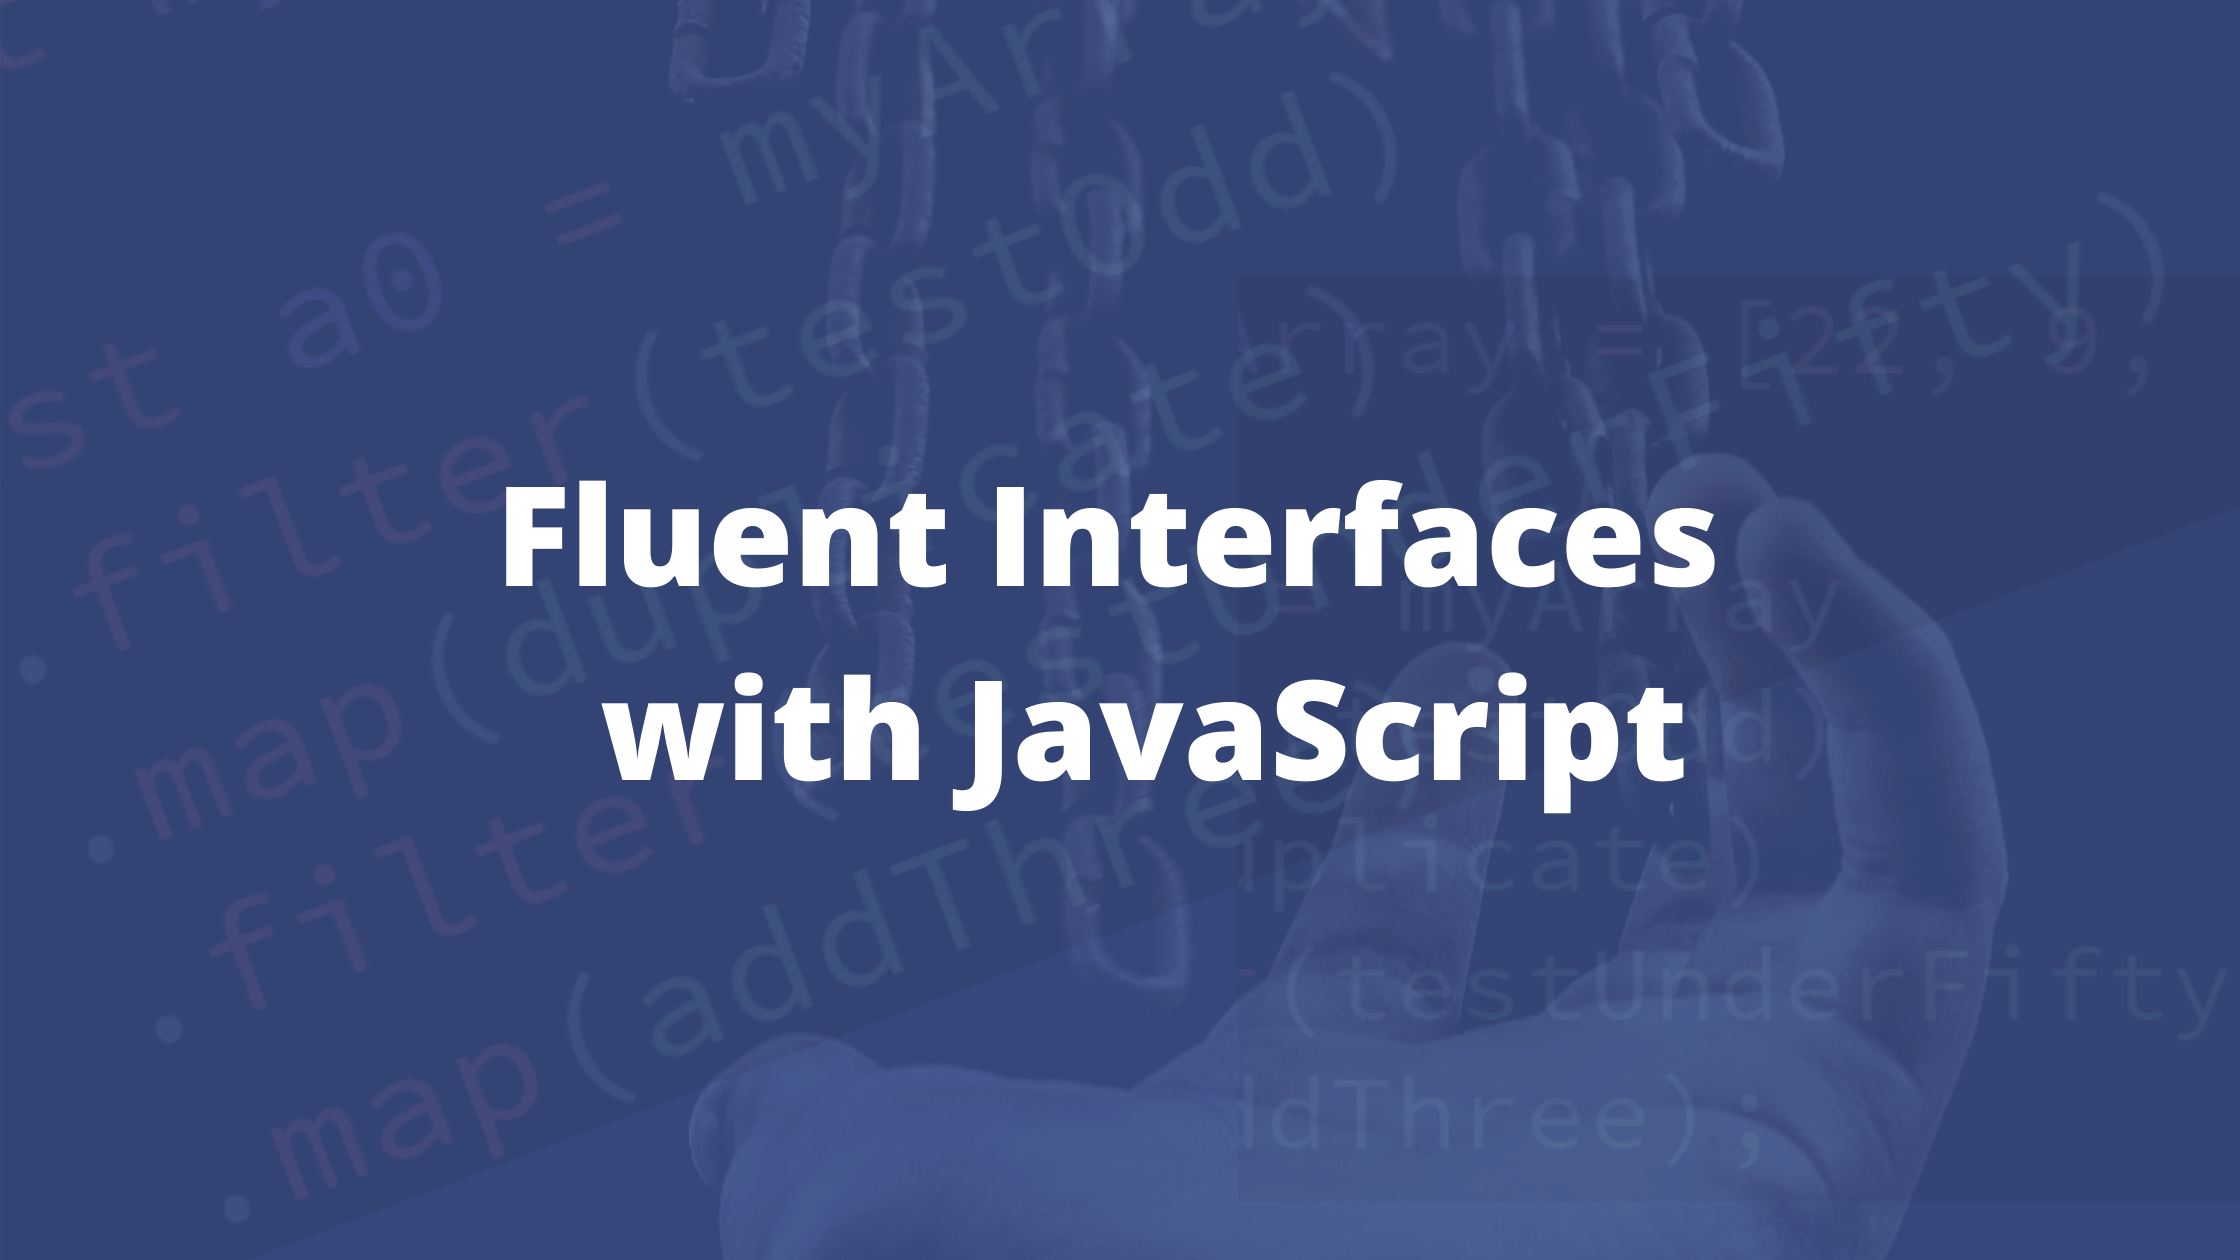 Forever Functional: Chaining Calls for Fluent Interfaces